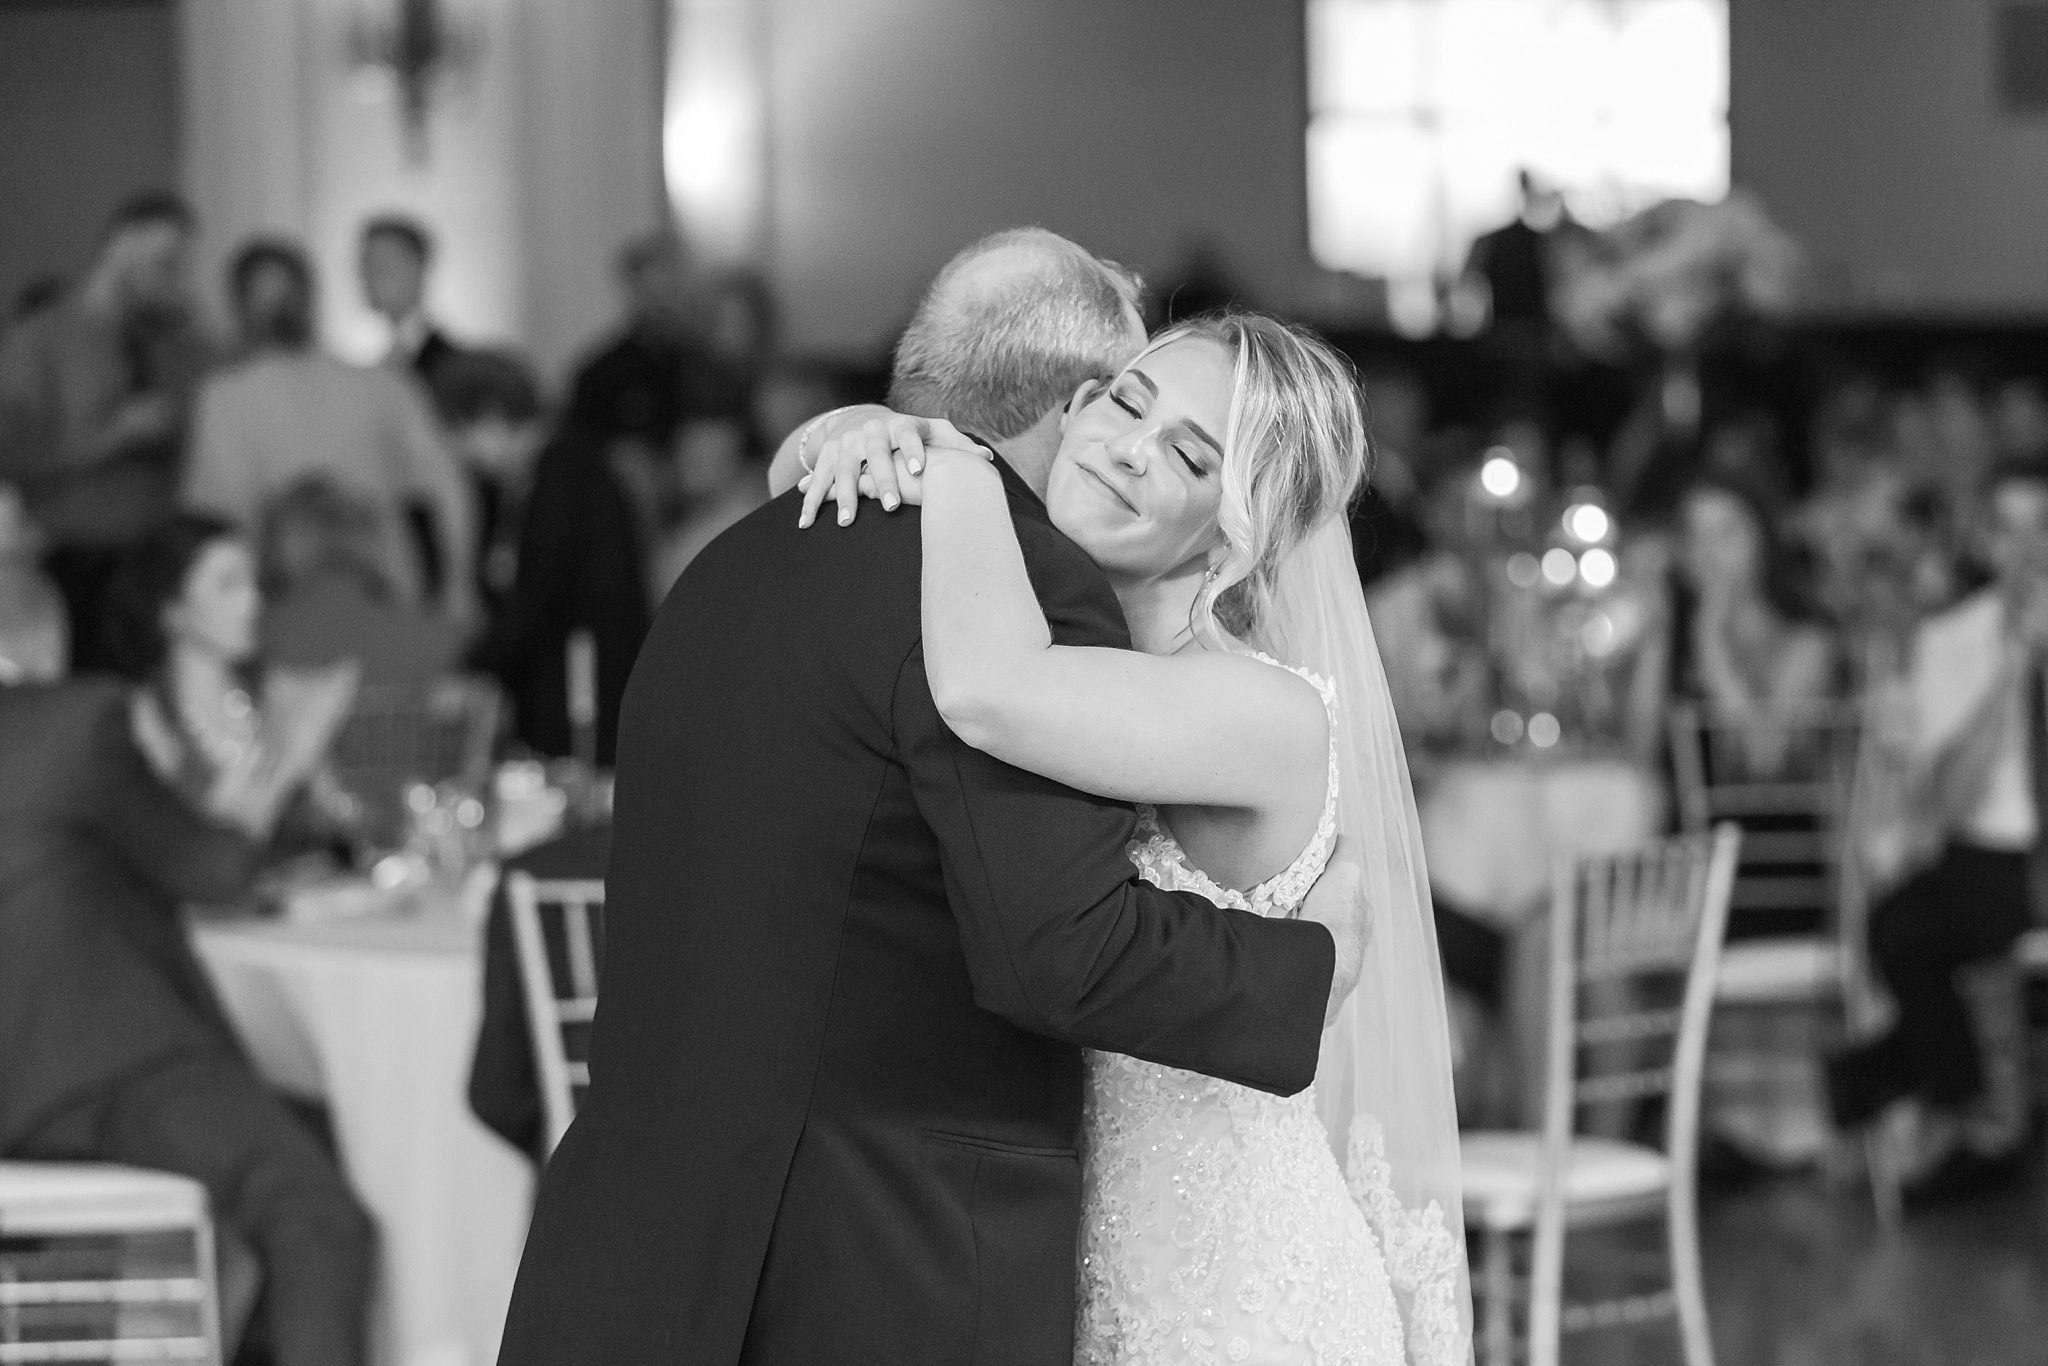 candid-romantic-wedding-photos-at-the-masonic-temple-belle-isle-detroit-institute-of-arts-in-detroit-michigan-by-courtney-carolyn-photography_0112.jpg